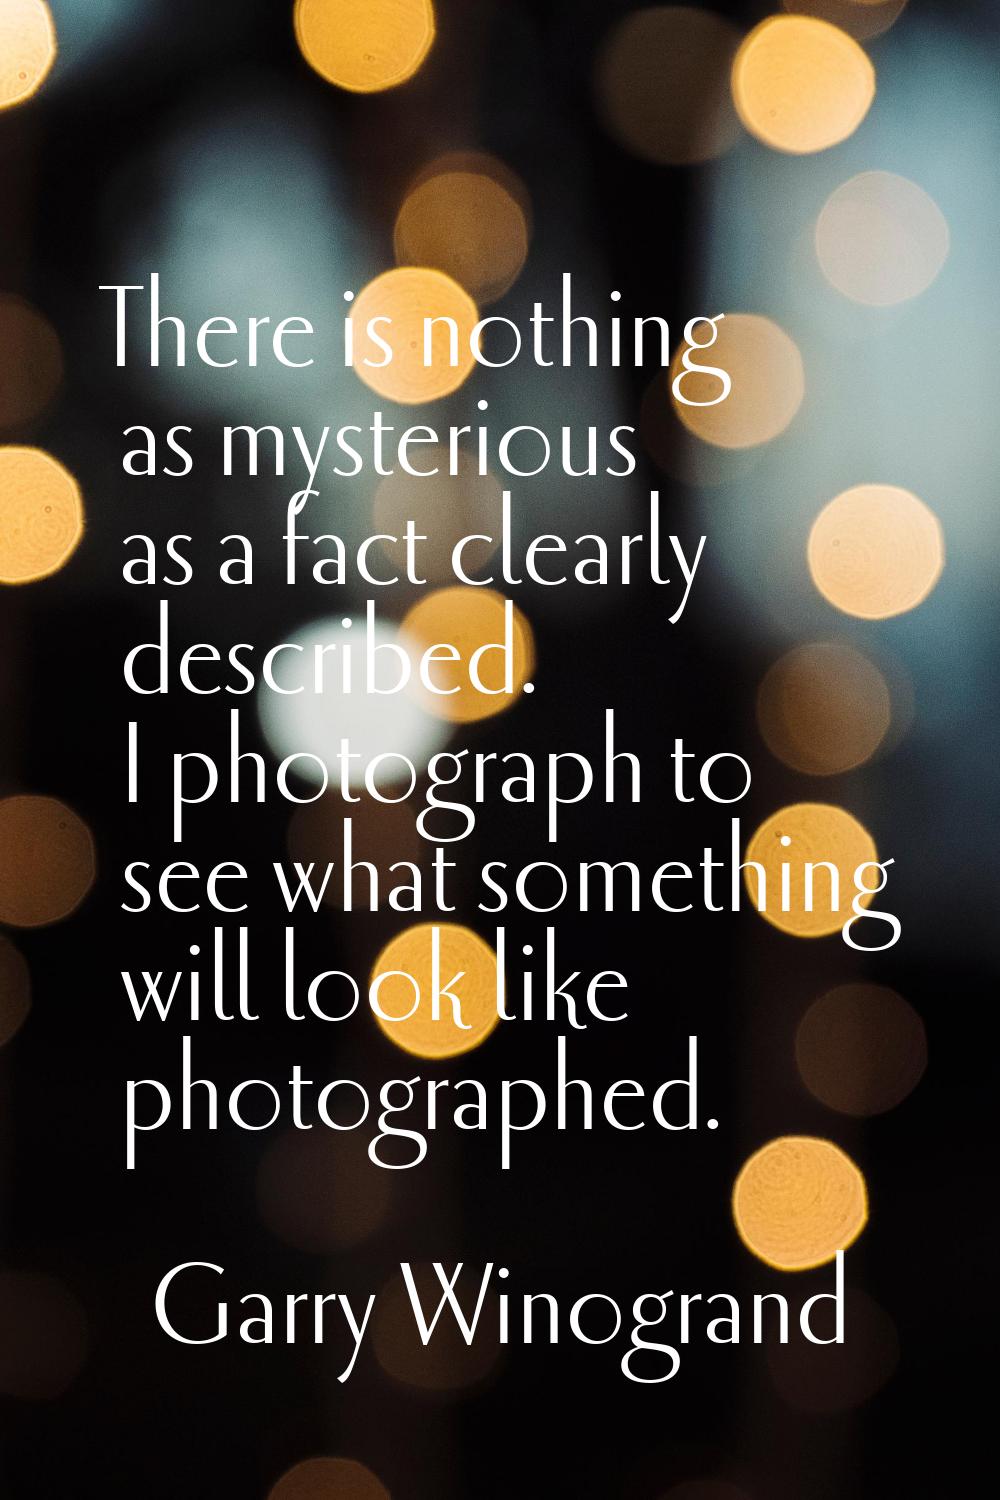 There is nothing as mysterious as a fact clearly described. I photograph to see what something will